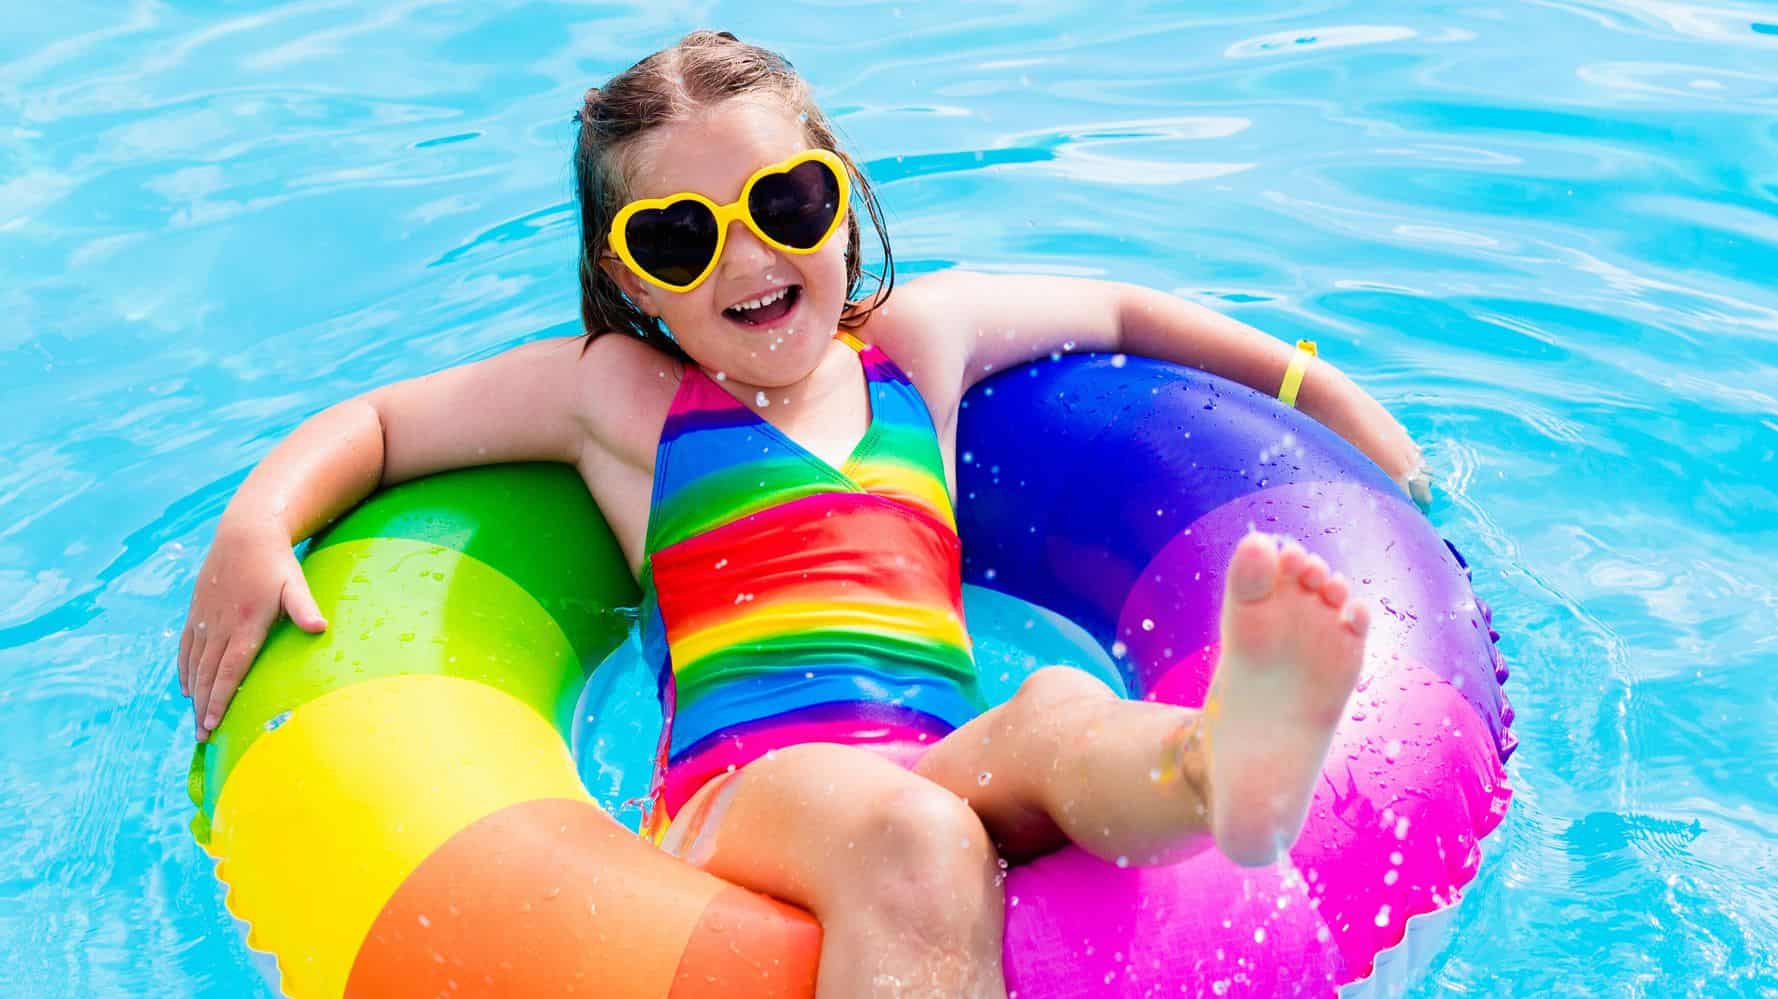 Summer Water Fun Poses A Risk Of Drowning: Be Careful!